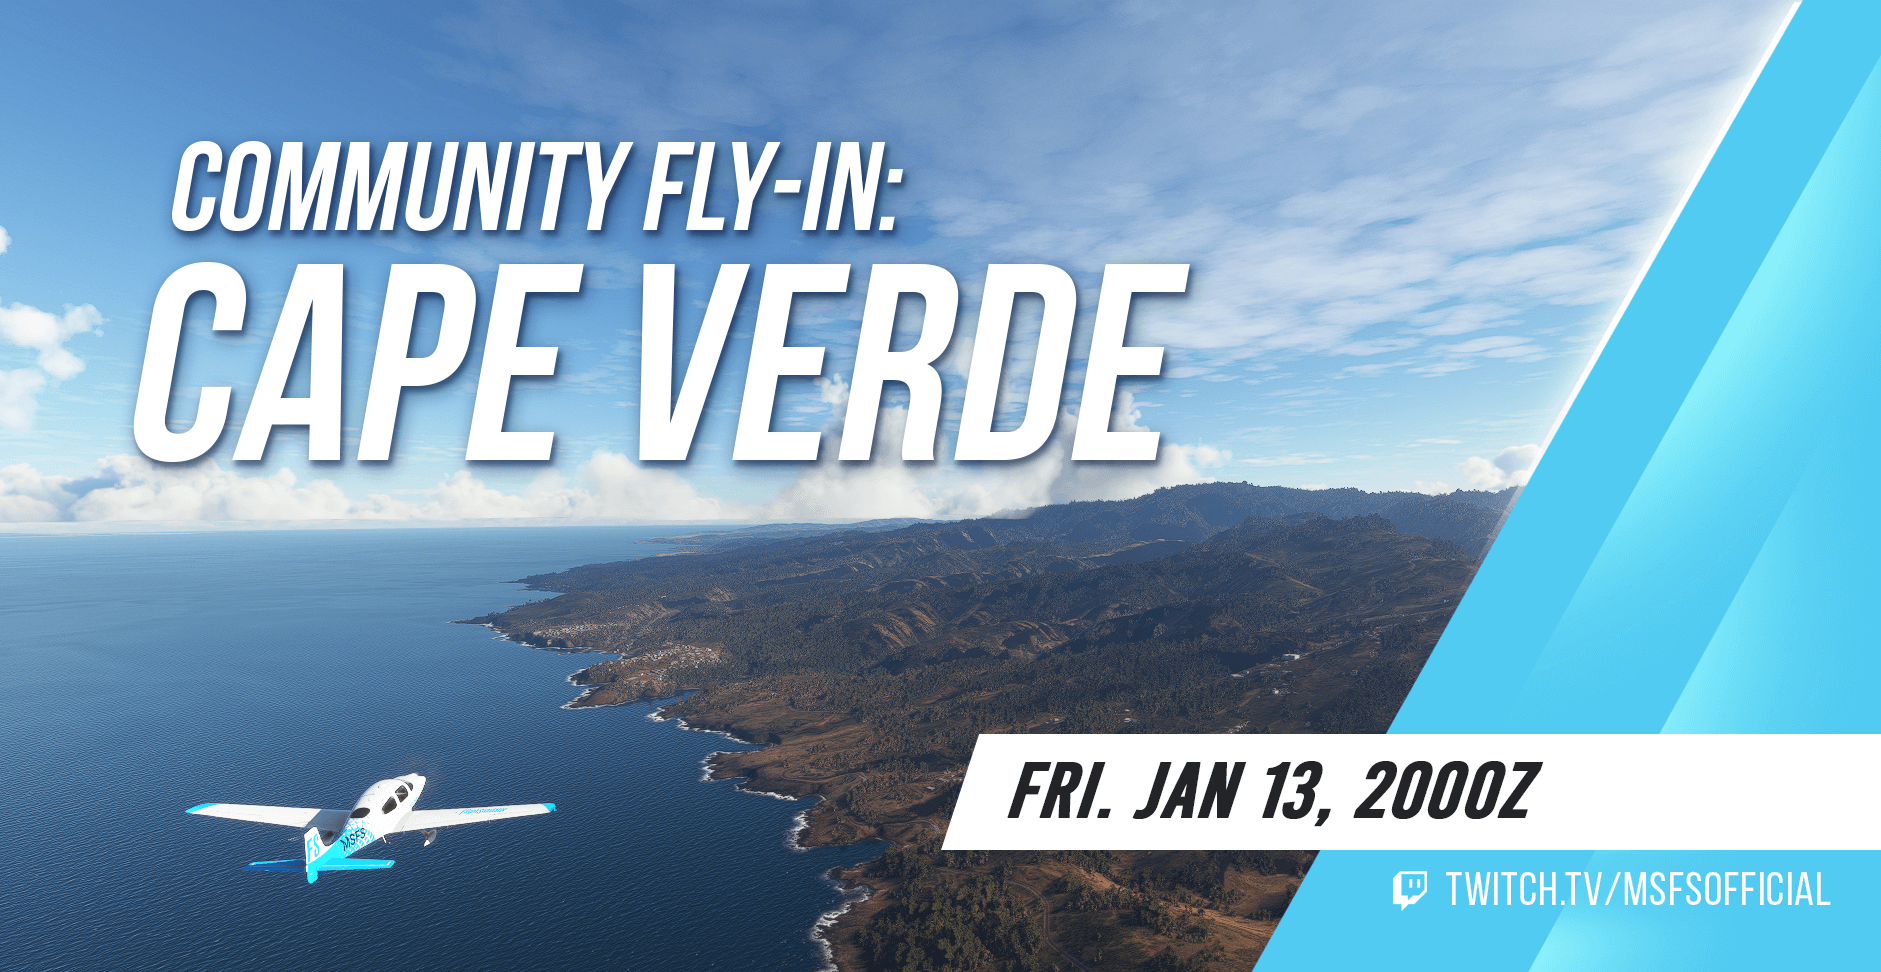 Community Fly-In: Cape Verde. Friday, January 13th at 2000Z. Watch at Twitch.tv/msfsofficial.